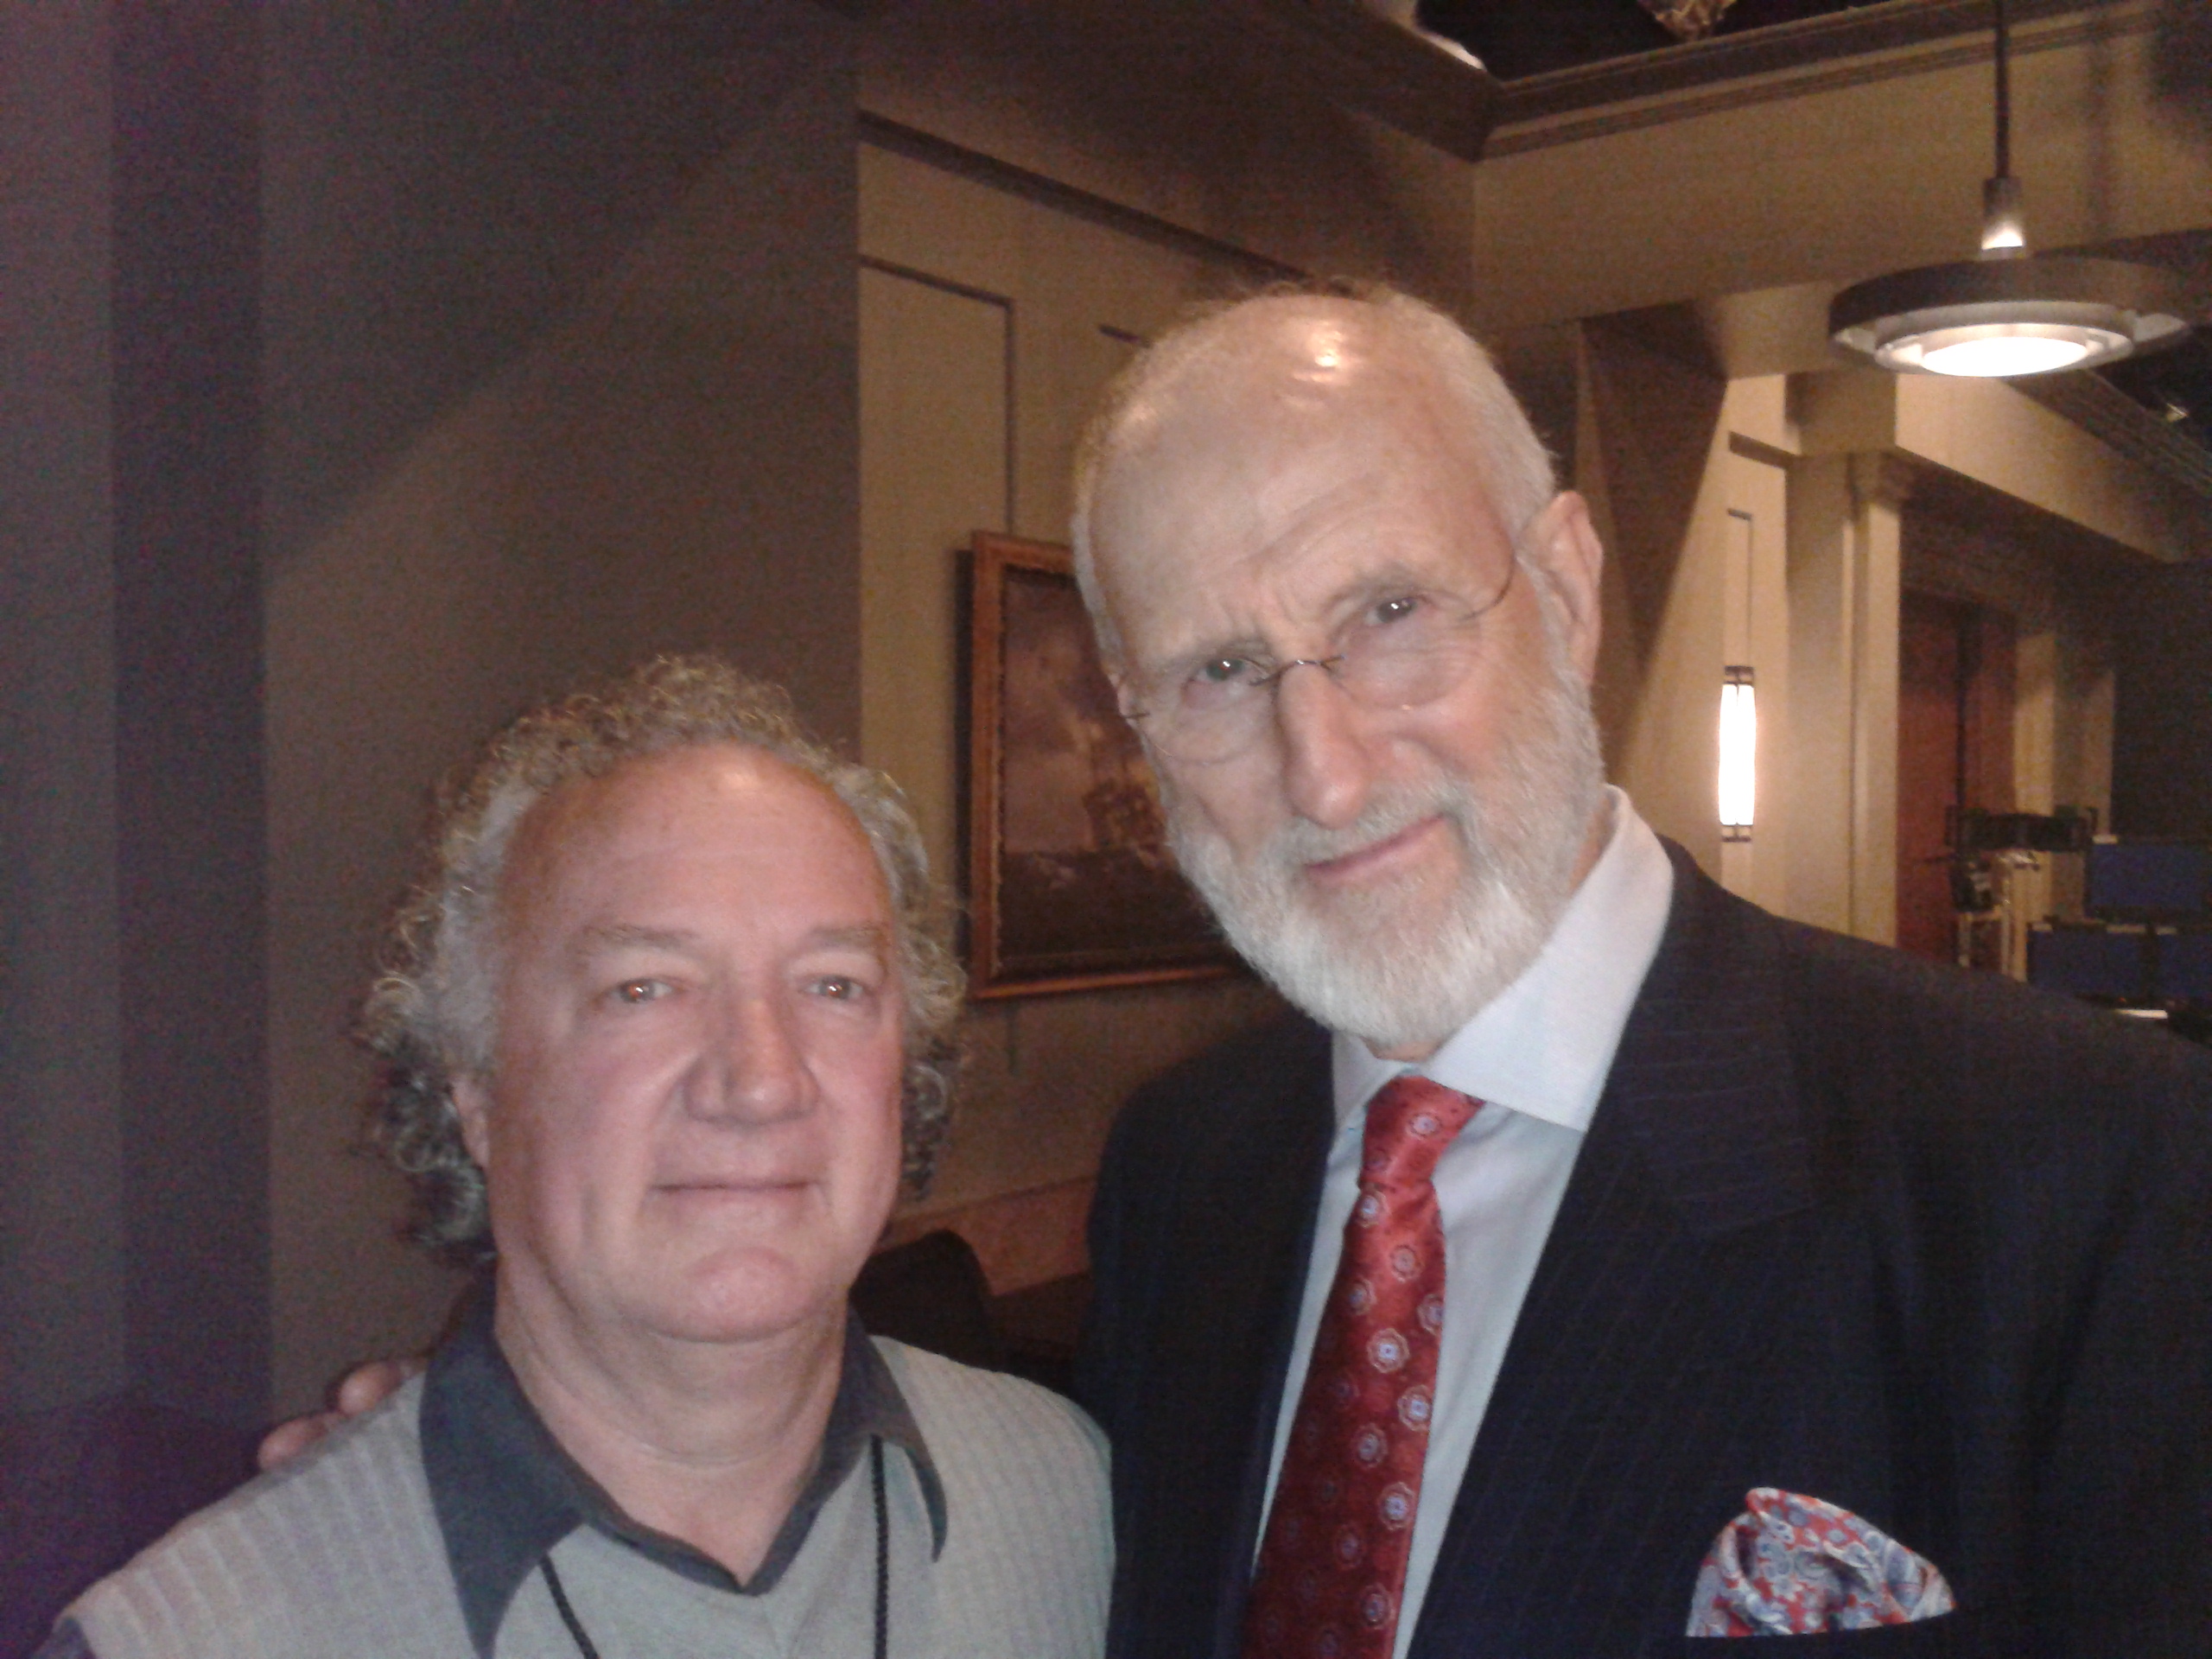 On set with James Cromwell, 